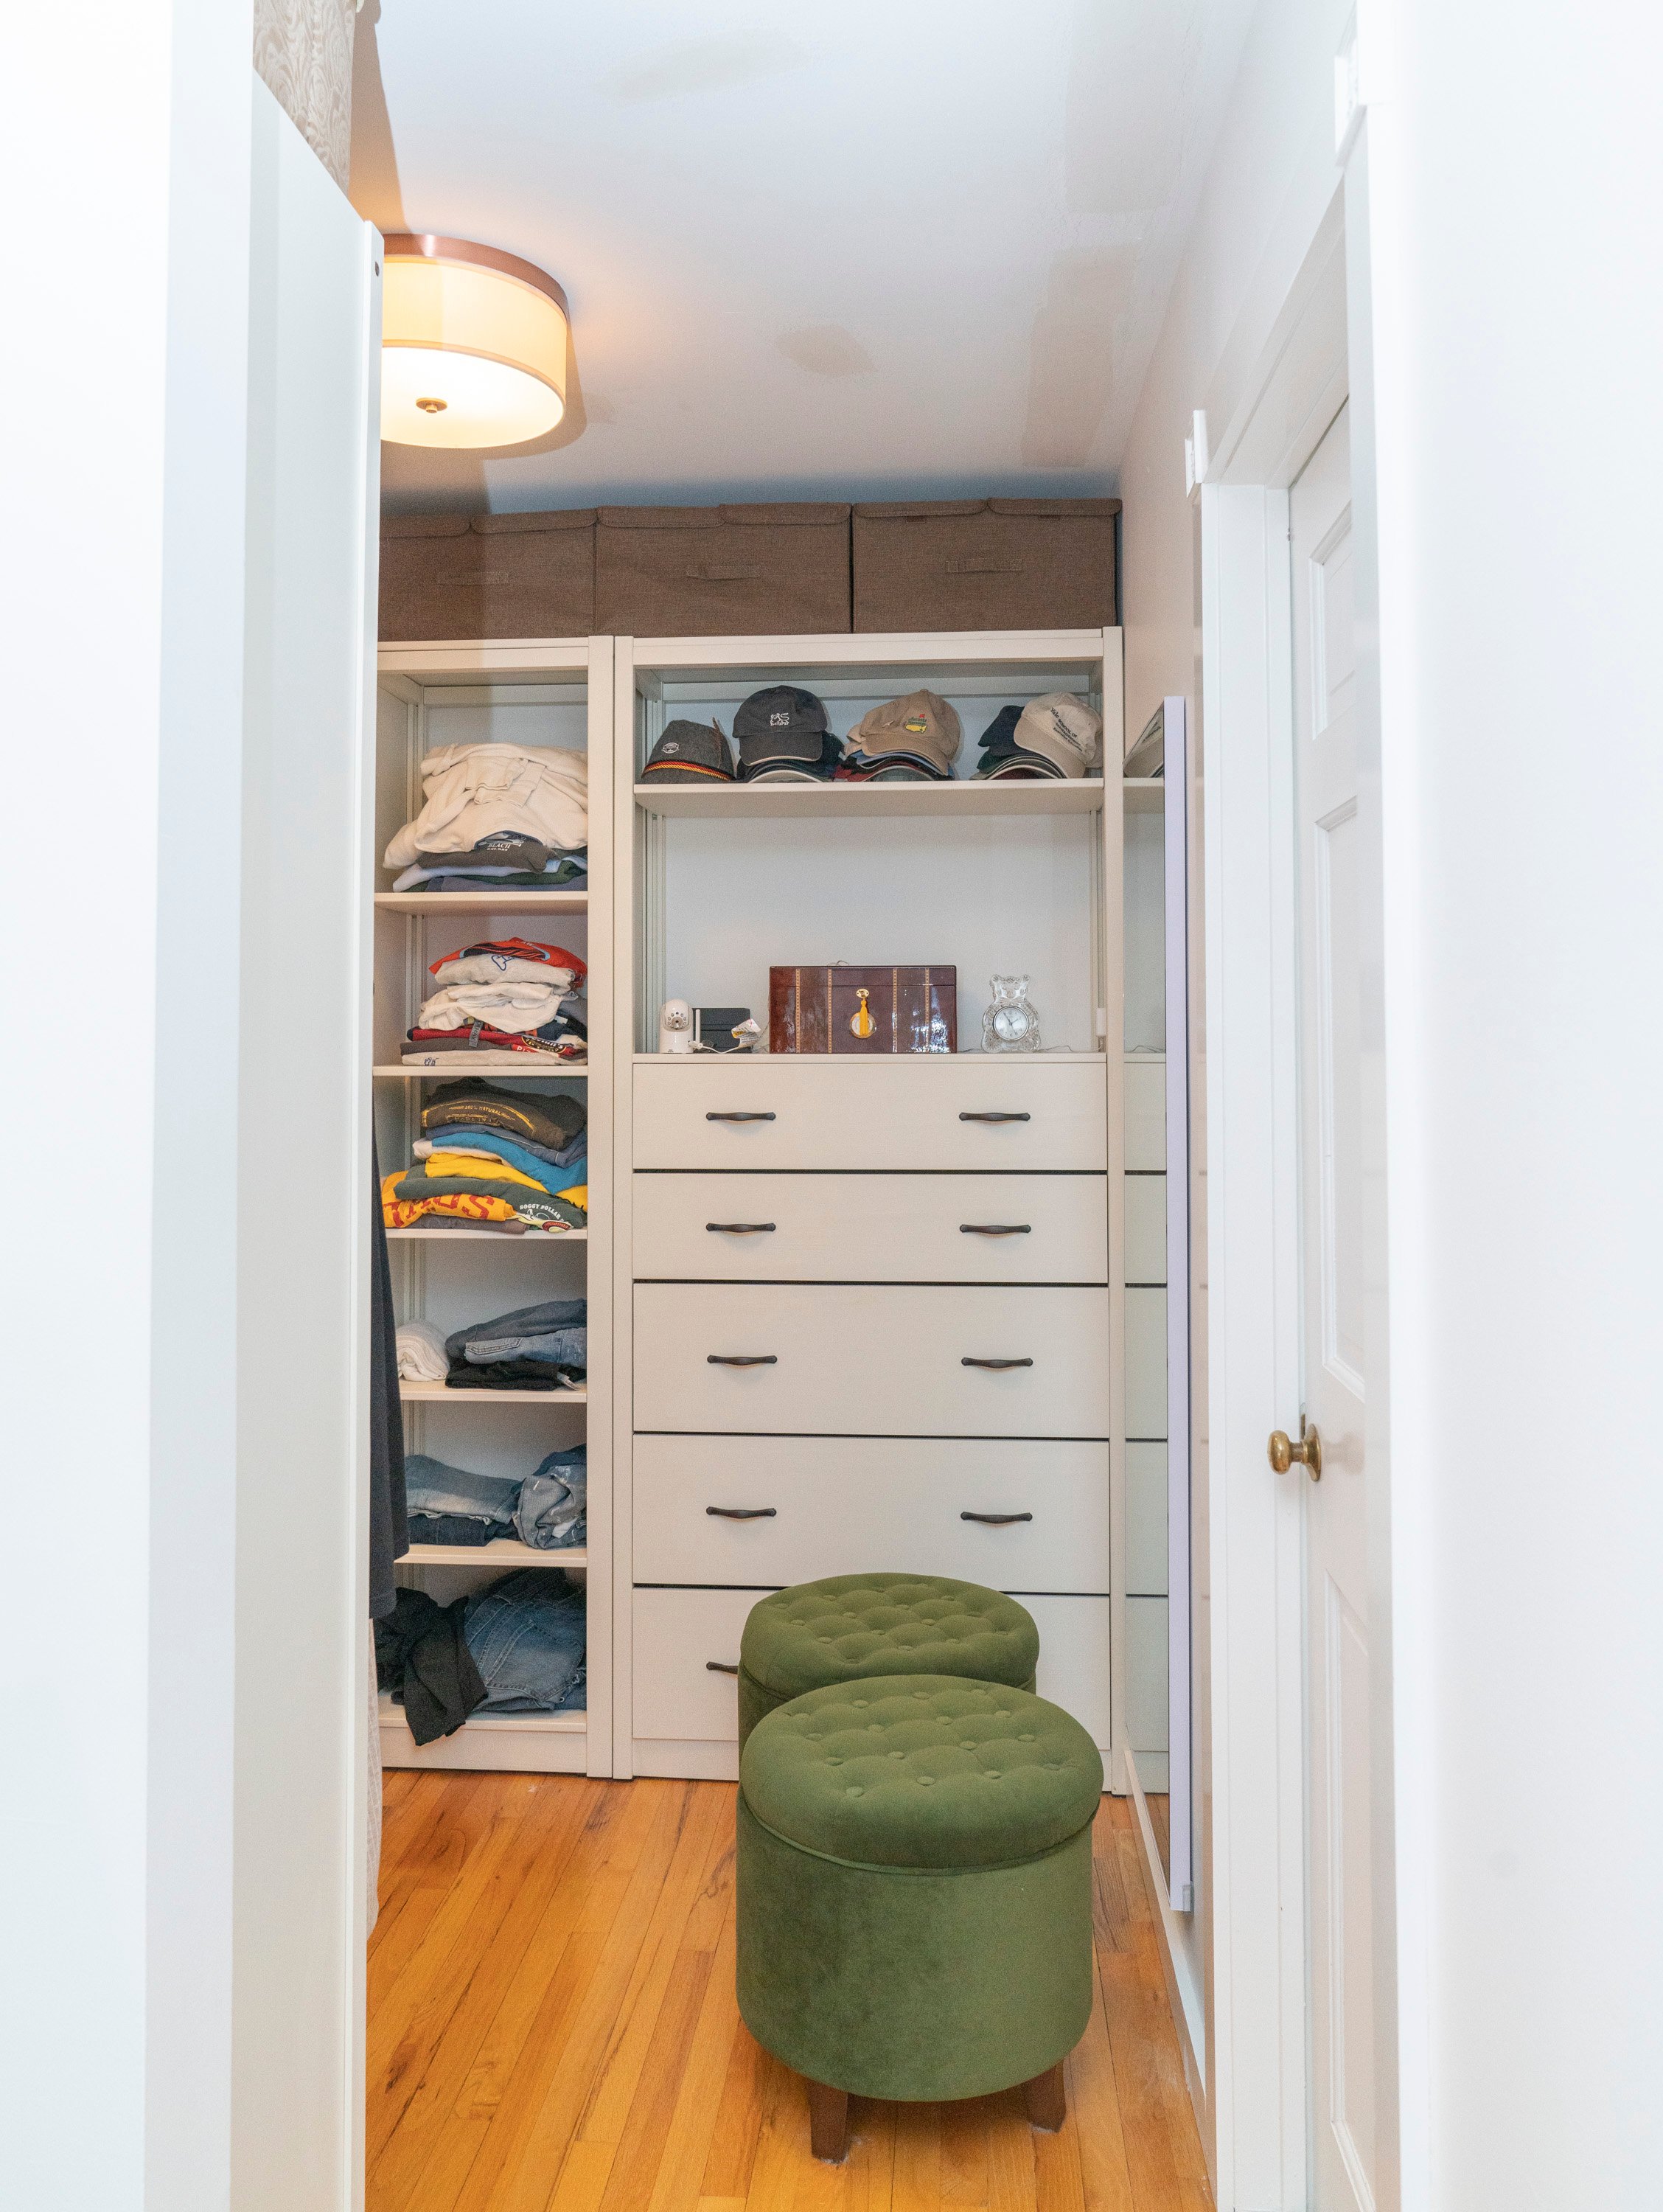 large walk in closet with built in shelving and green round chairs